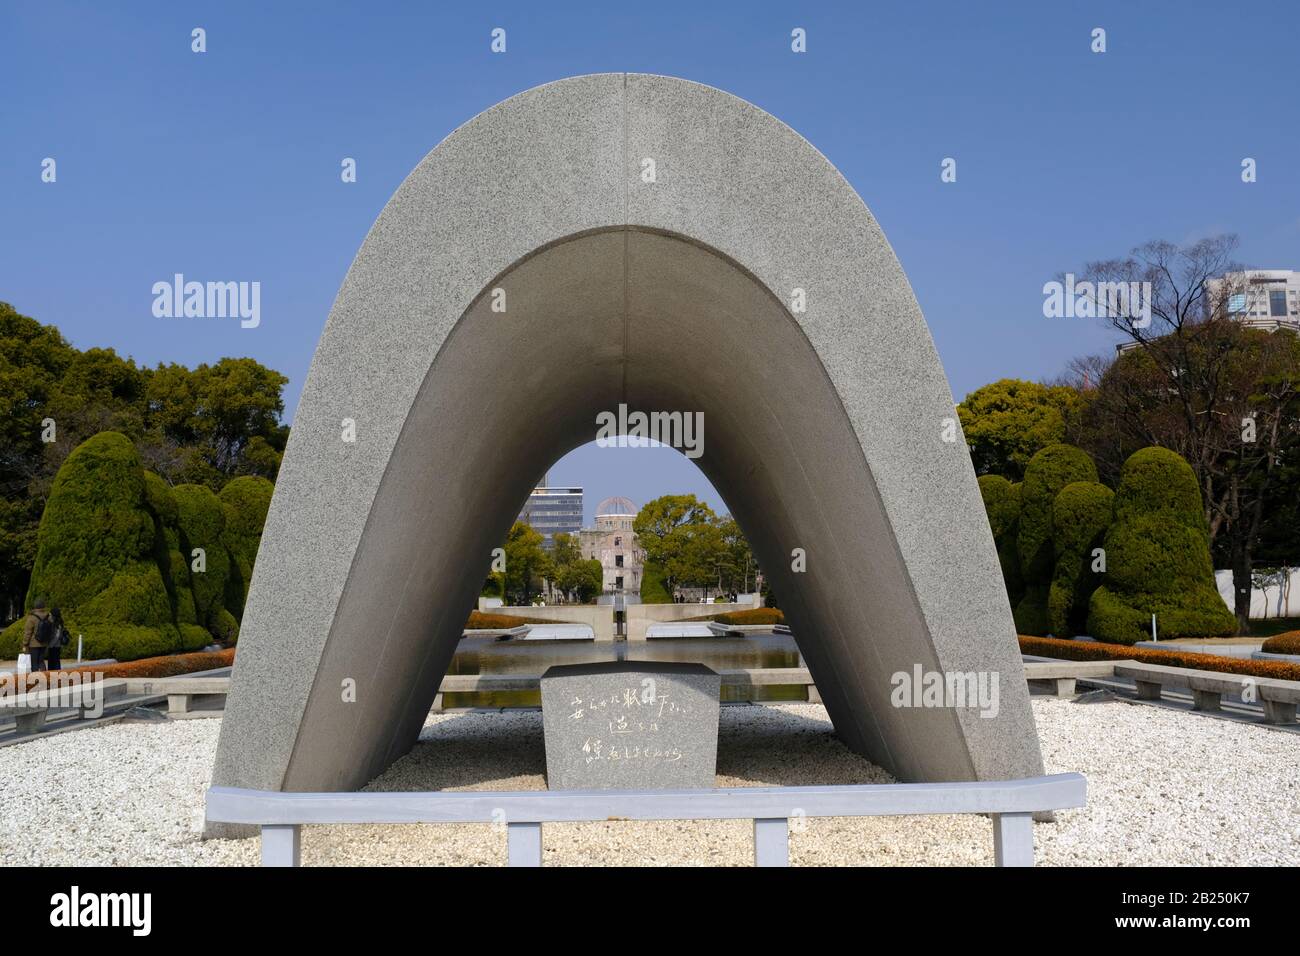 Cenotaph for the Atomic bomb Victims (Memorial Monument for Hiroshima, City of Peace) Stock Photo